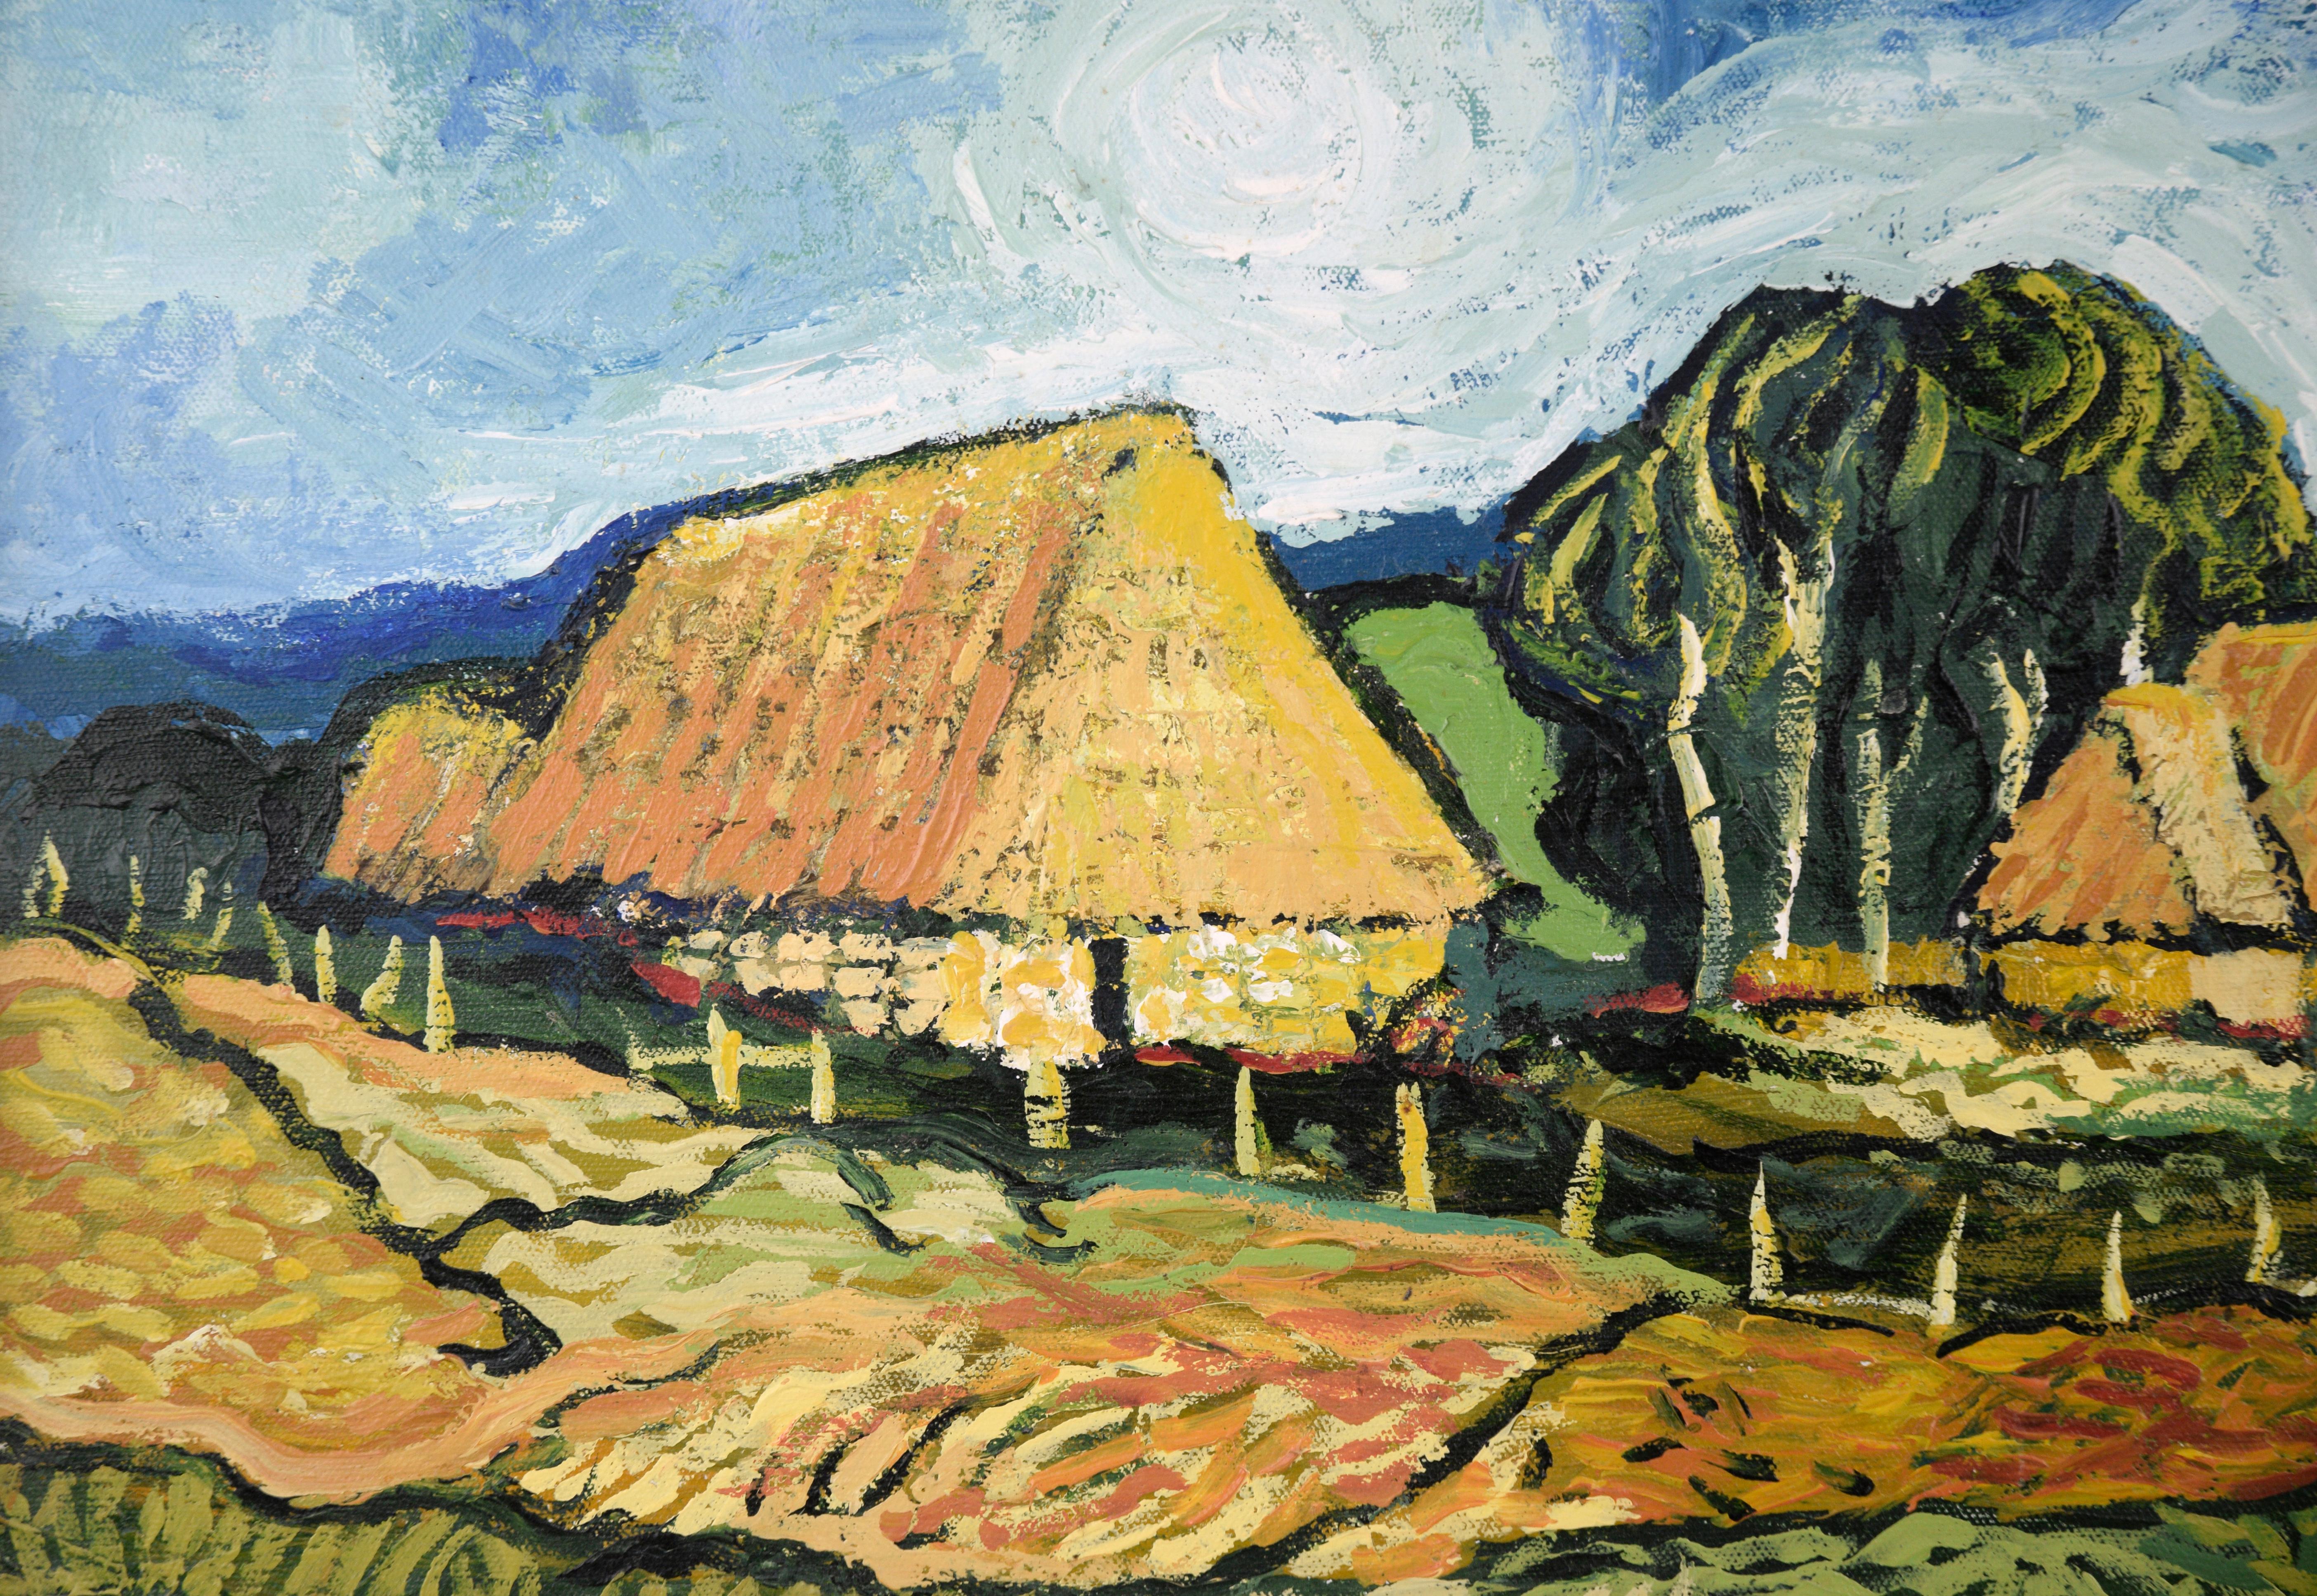 Country Homes - Landscape (in the style of Vincent van Gogh) - Gray Landscape Painting by D Bauer 